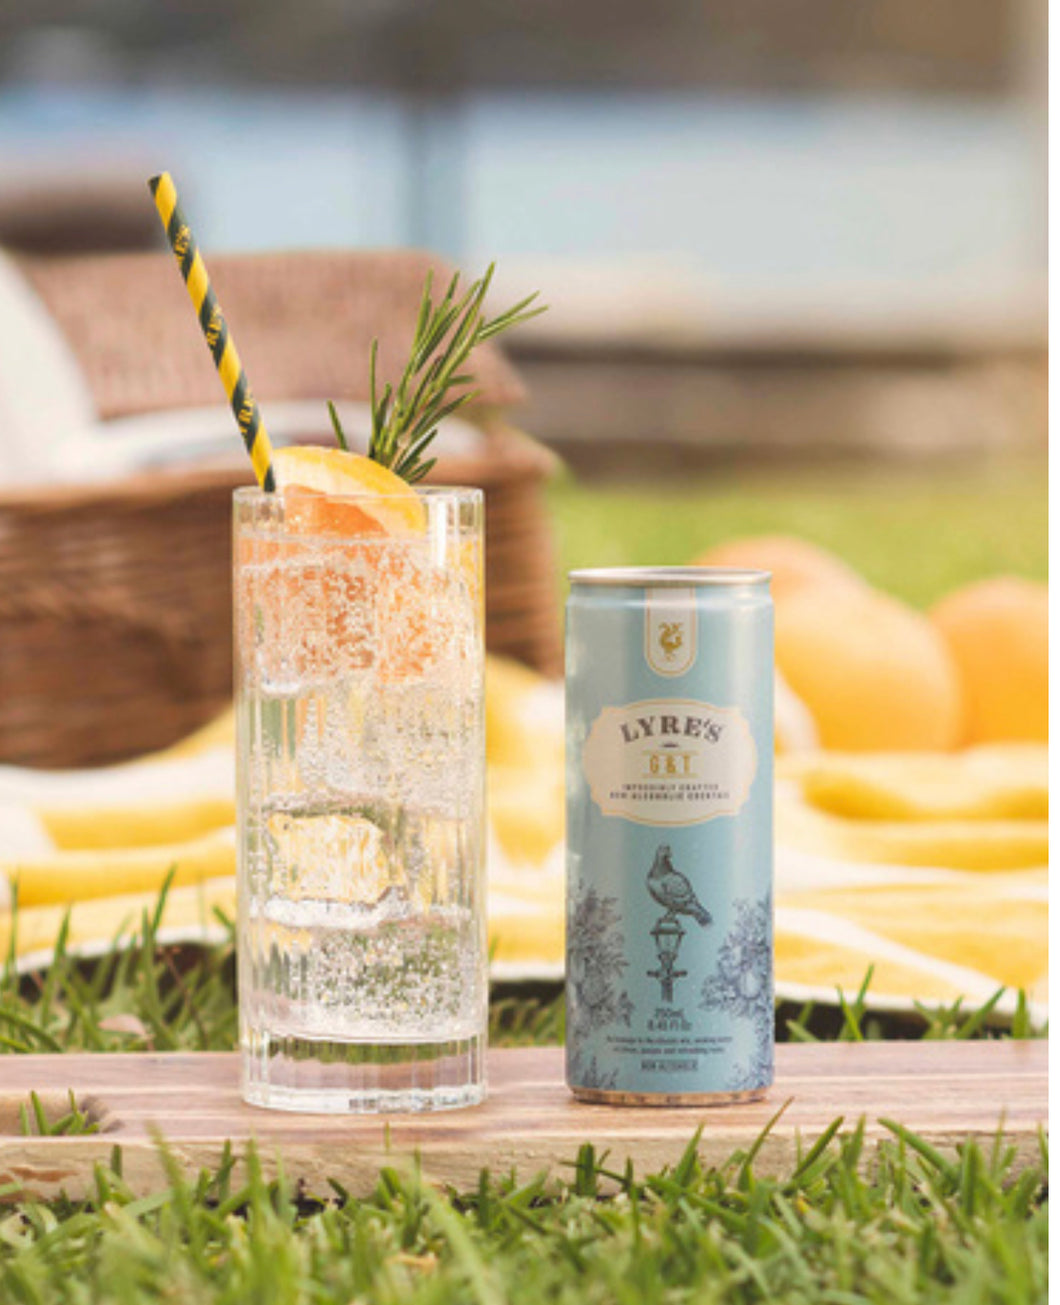 Lyre’s Gin and Tonic G&T